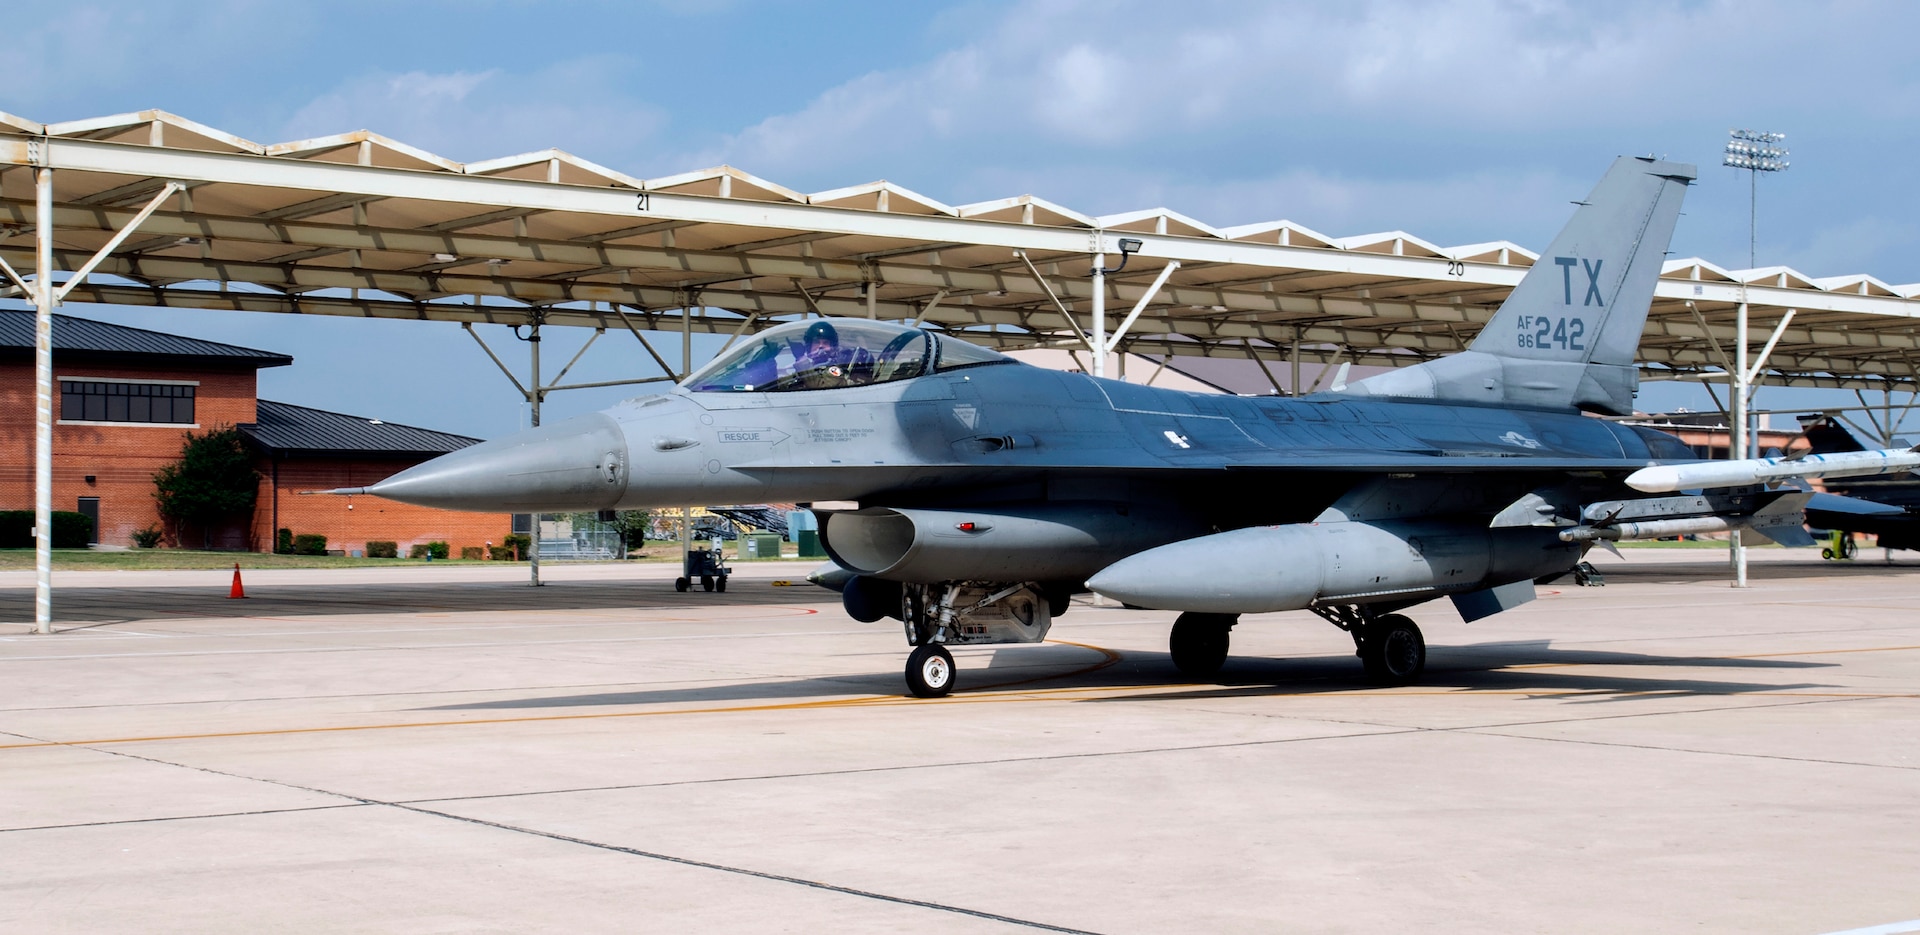 The 149th Fighter Wing's 182nd Fighter Squadron hosted a large force exercise with the 457th Fighter Squadron from Fort Worth at JBSA-Lackland May 21, 2022.